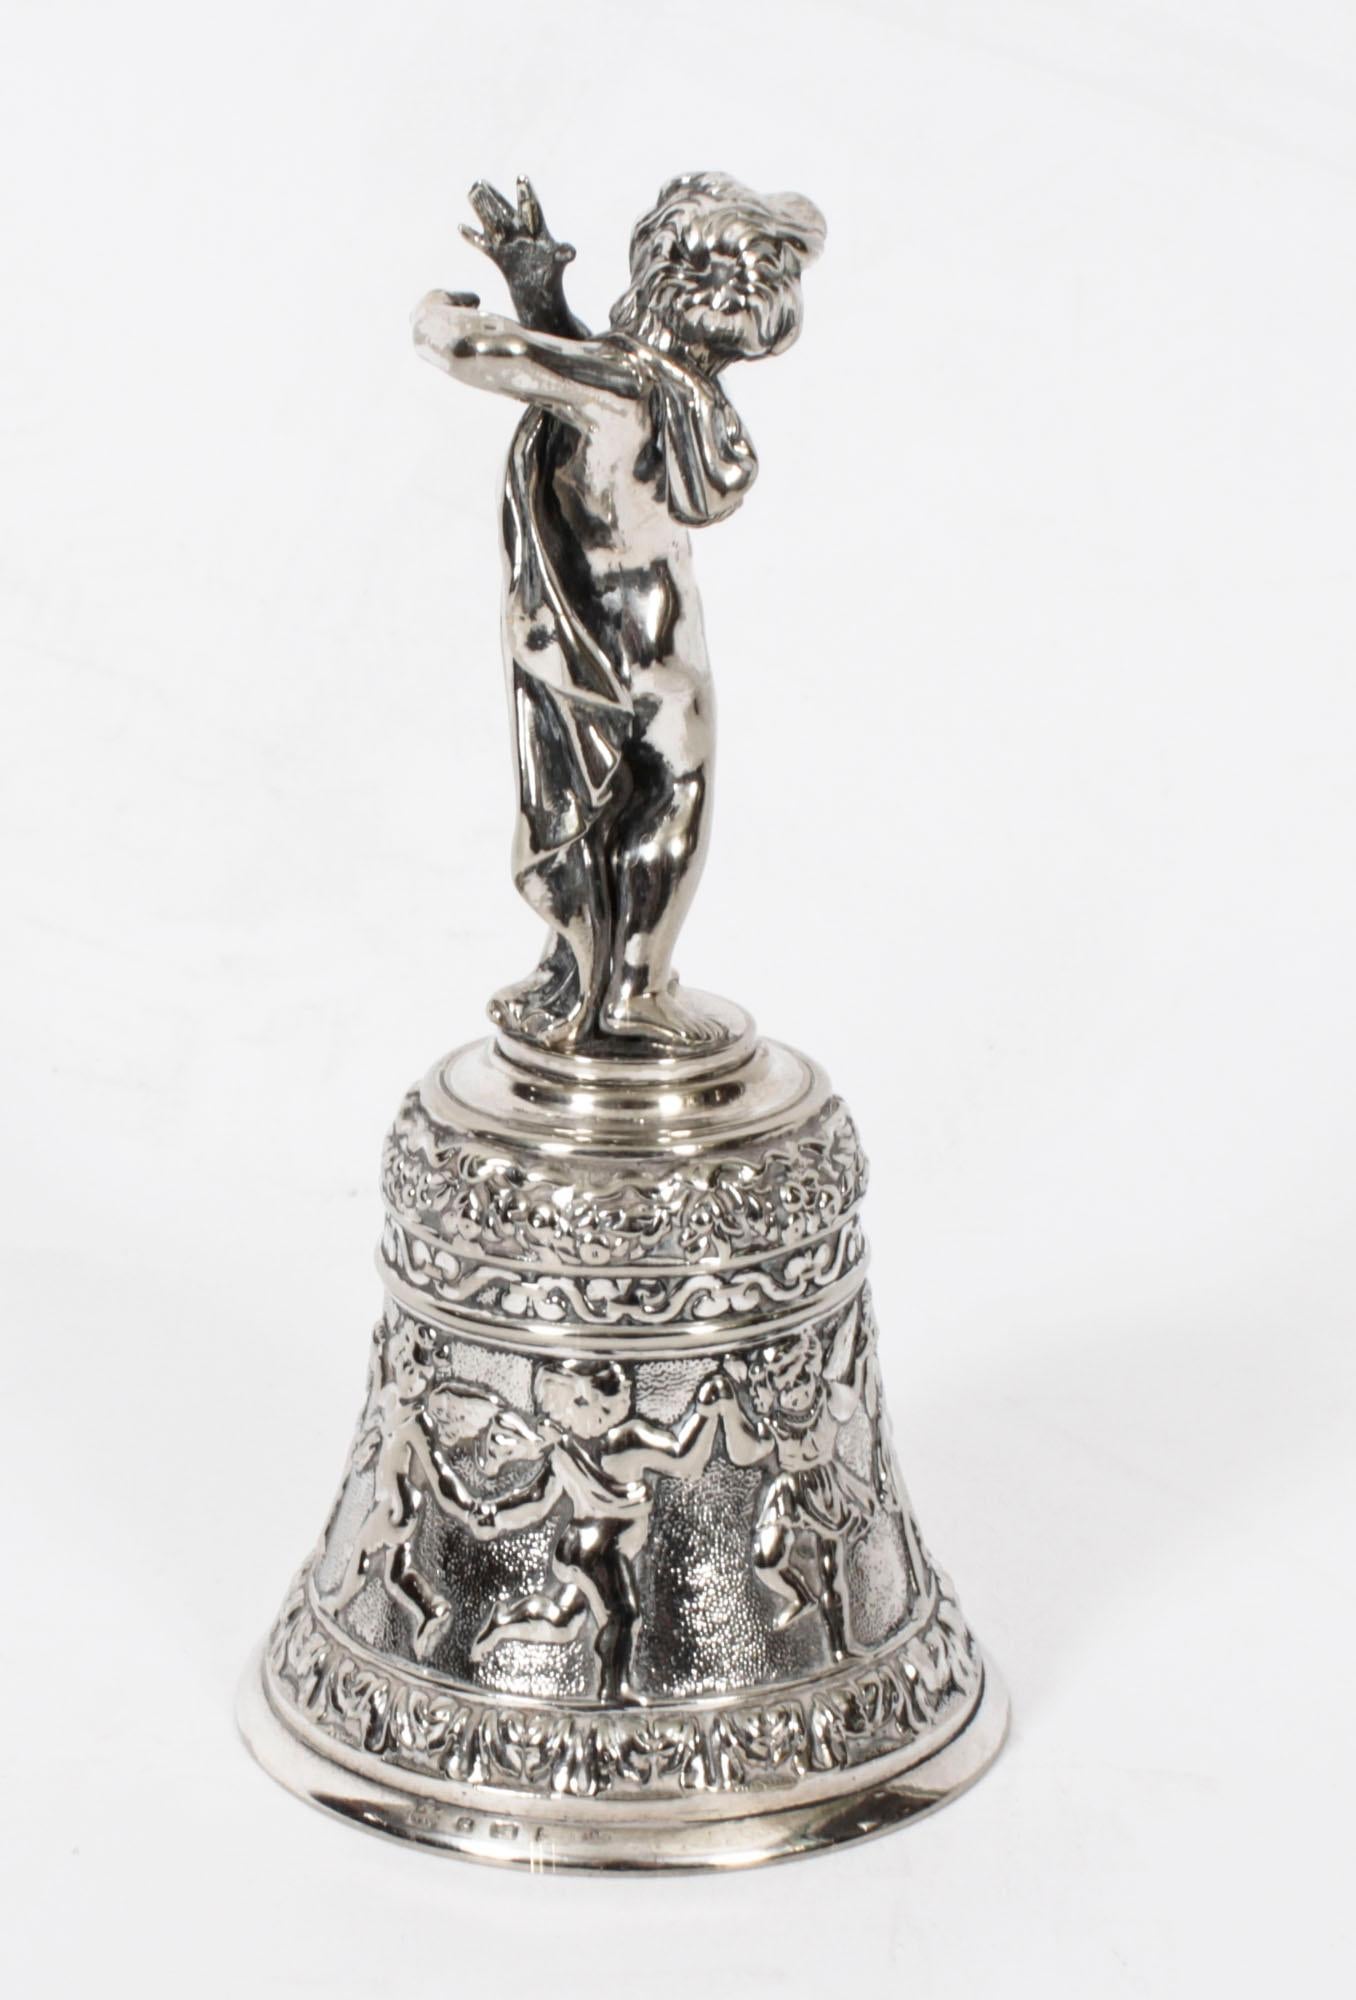 Antique Silver Plated Hand Bell Renaissance Revival 19th Century For Sale 5